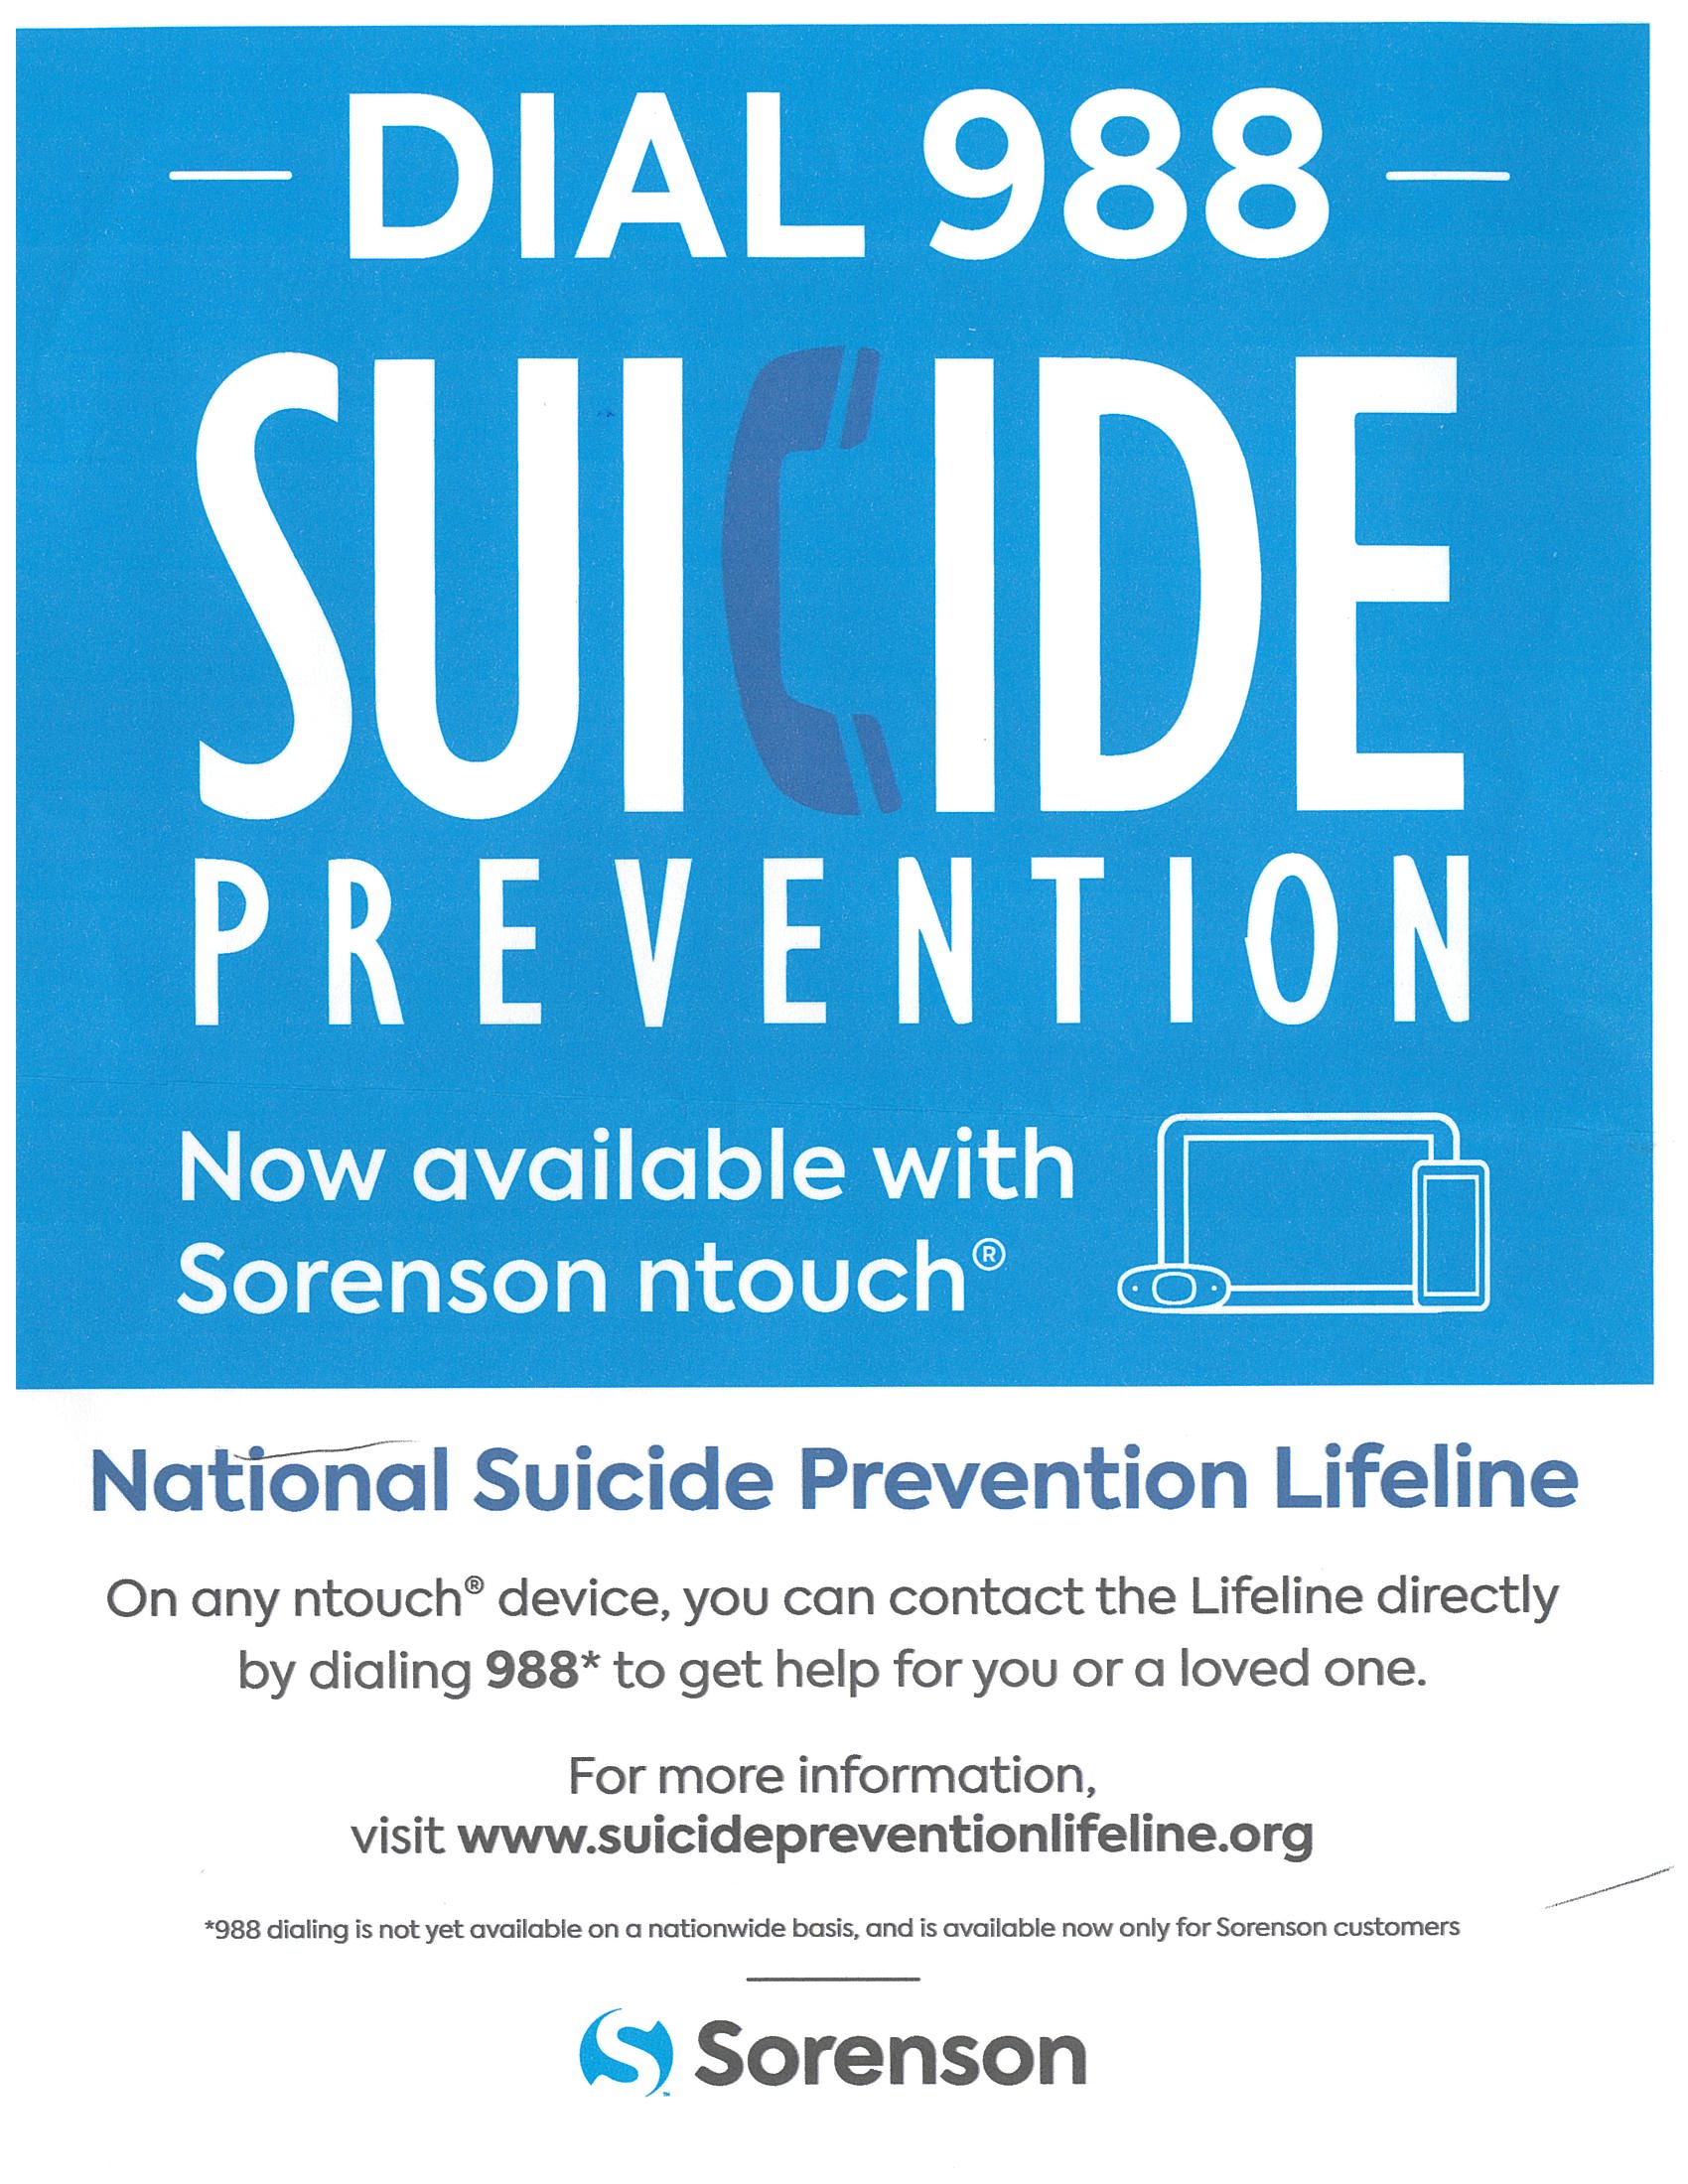 Dial 988* from a Sorenson ntouch device to reach the Suicide Prevention Hotline